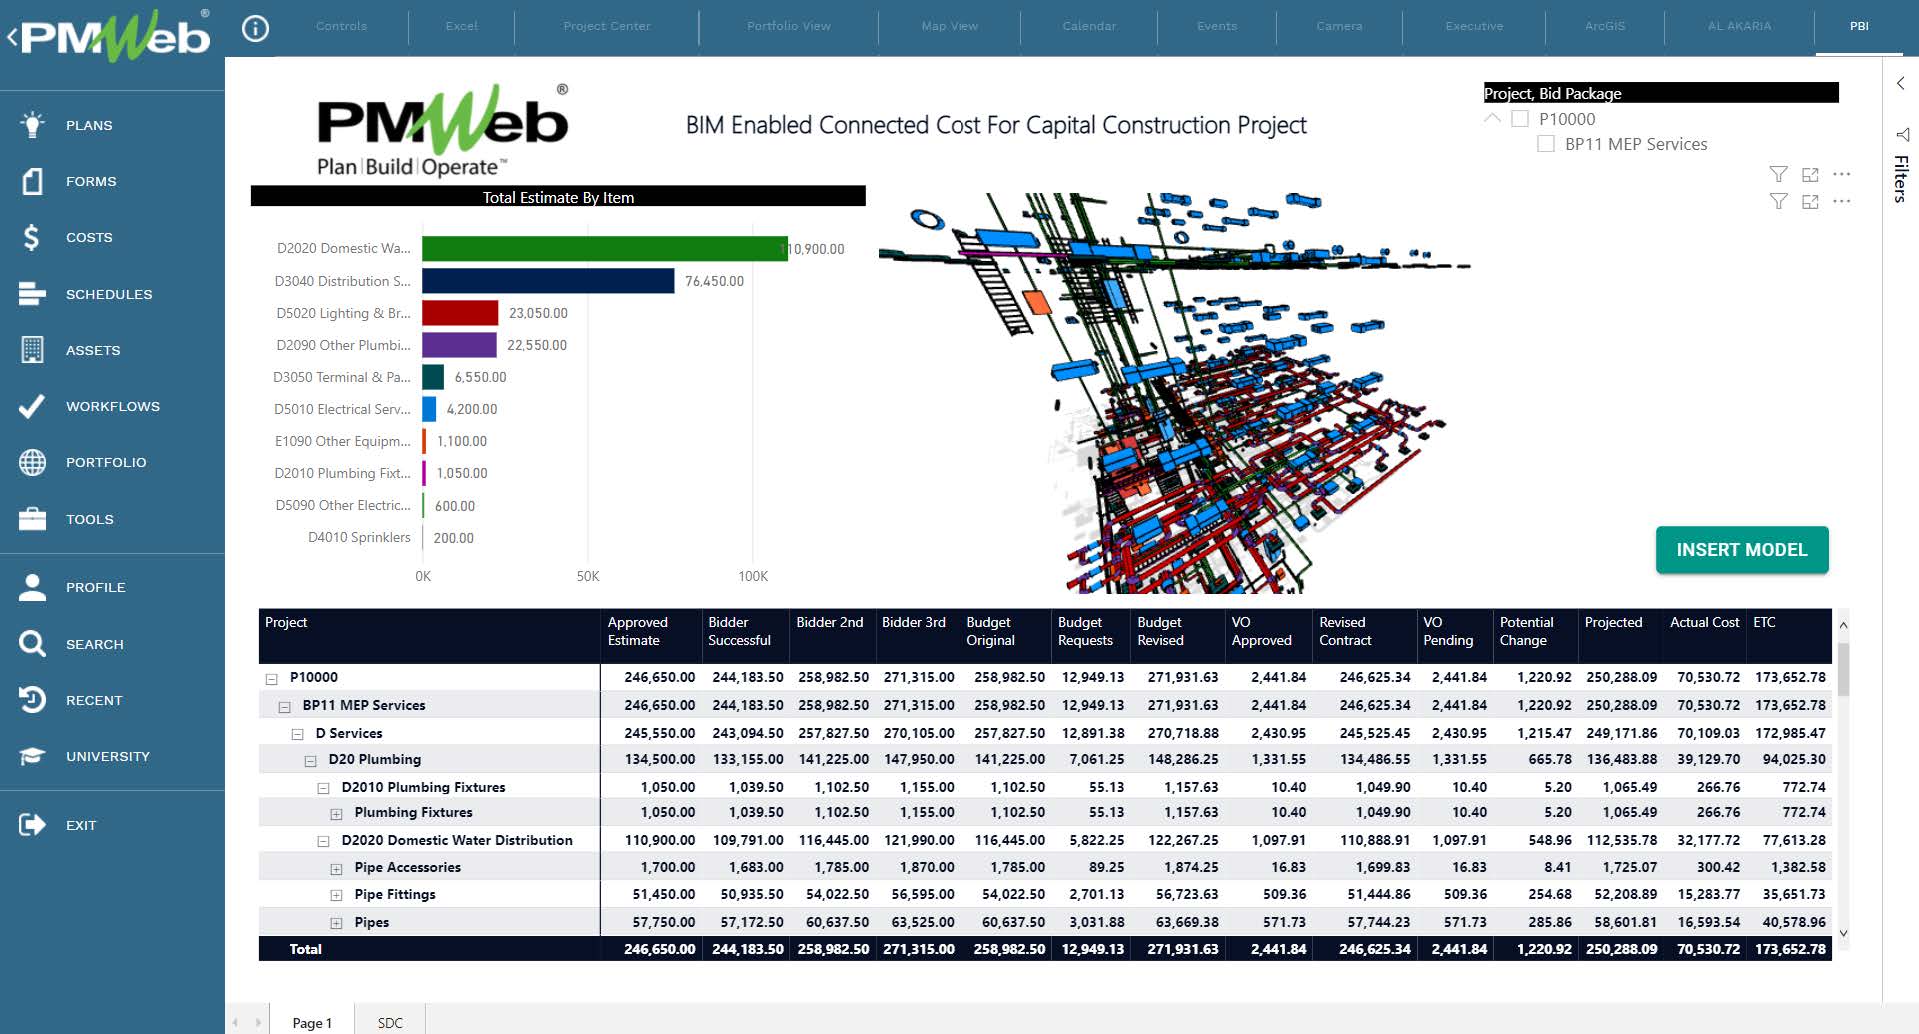 Project Control System (PCS) on Building Information Modeling (BIM) Enabled Projects